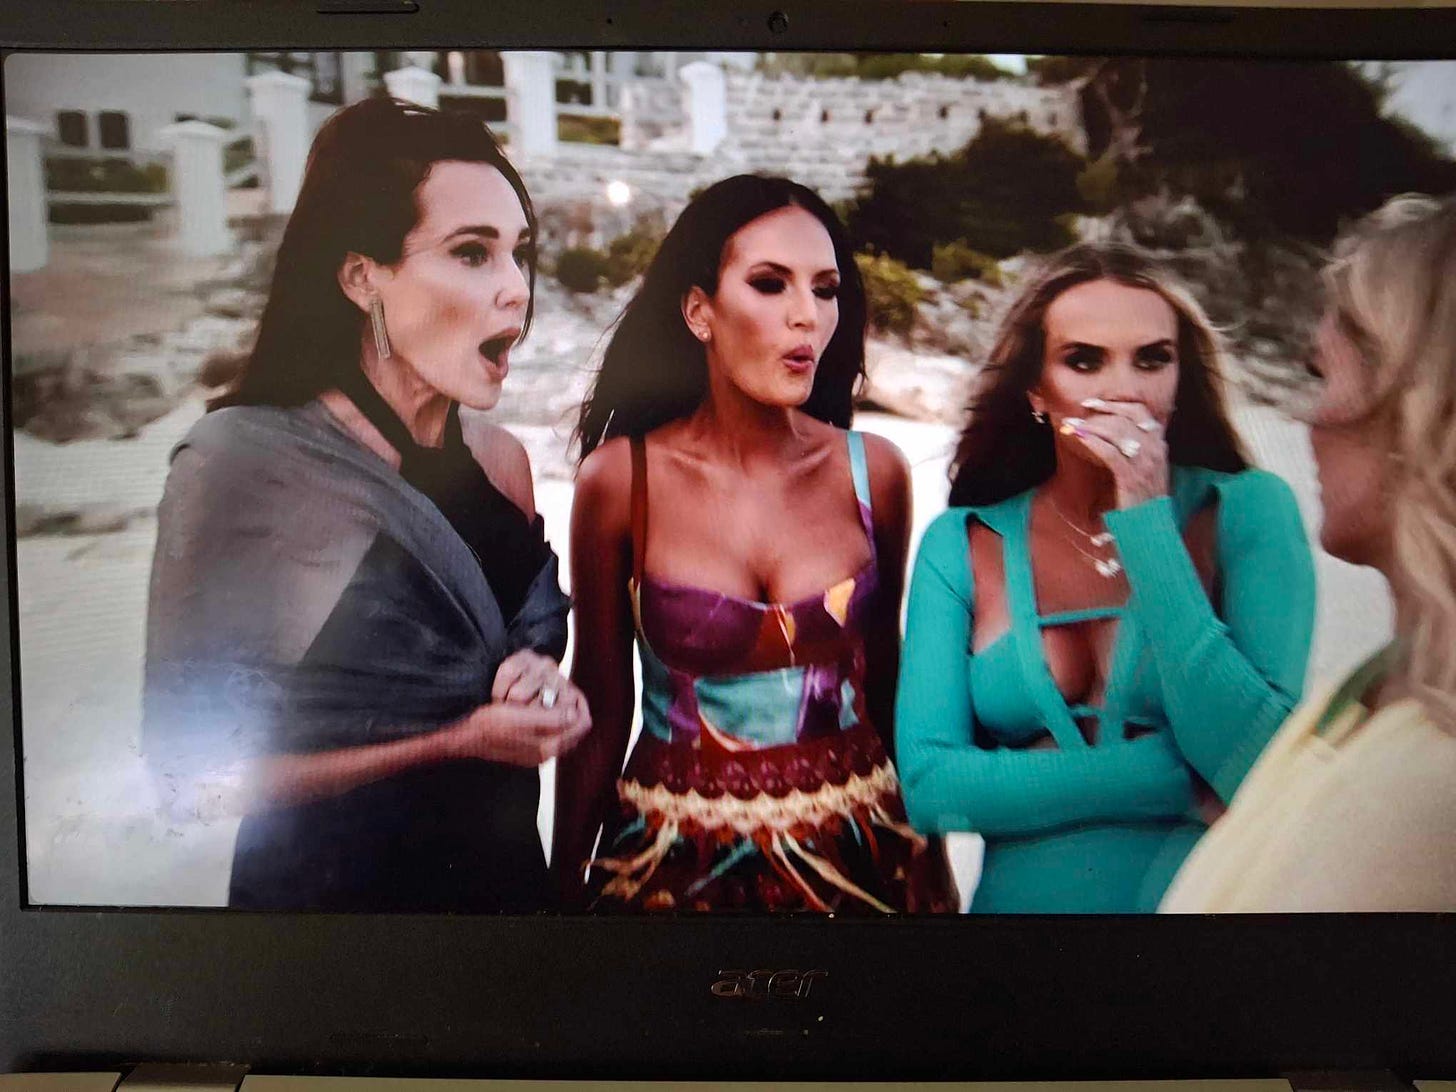 The cast of Real Housewives of Salt Lake City on a beach in gowns looking surprised